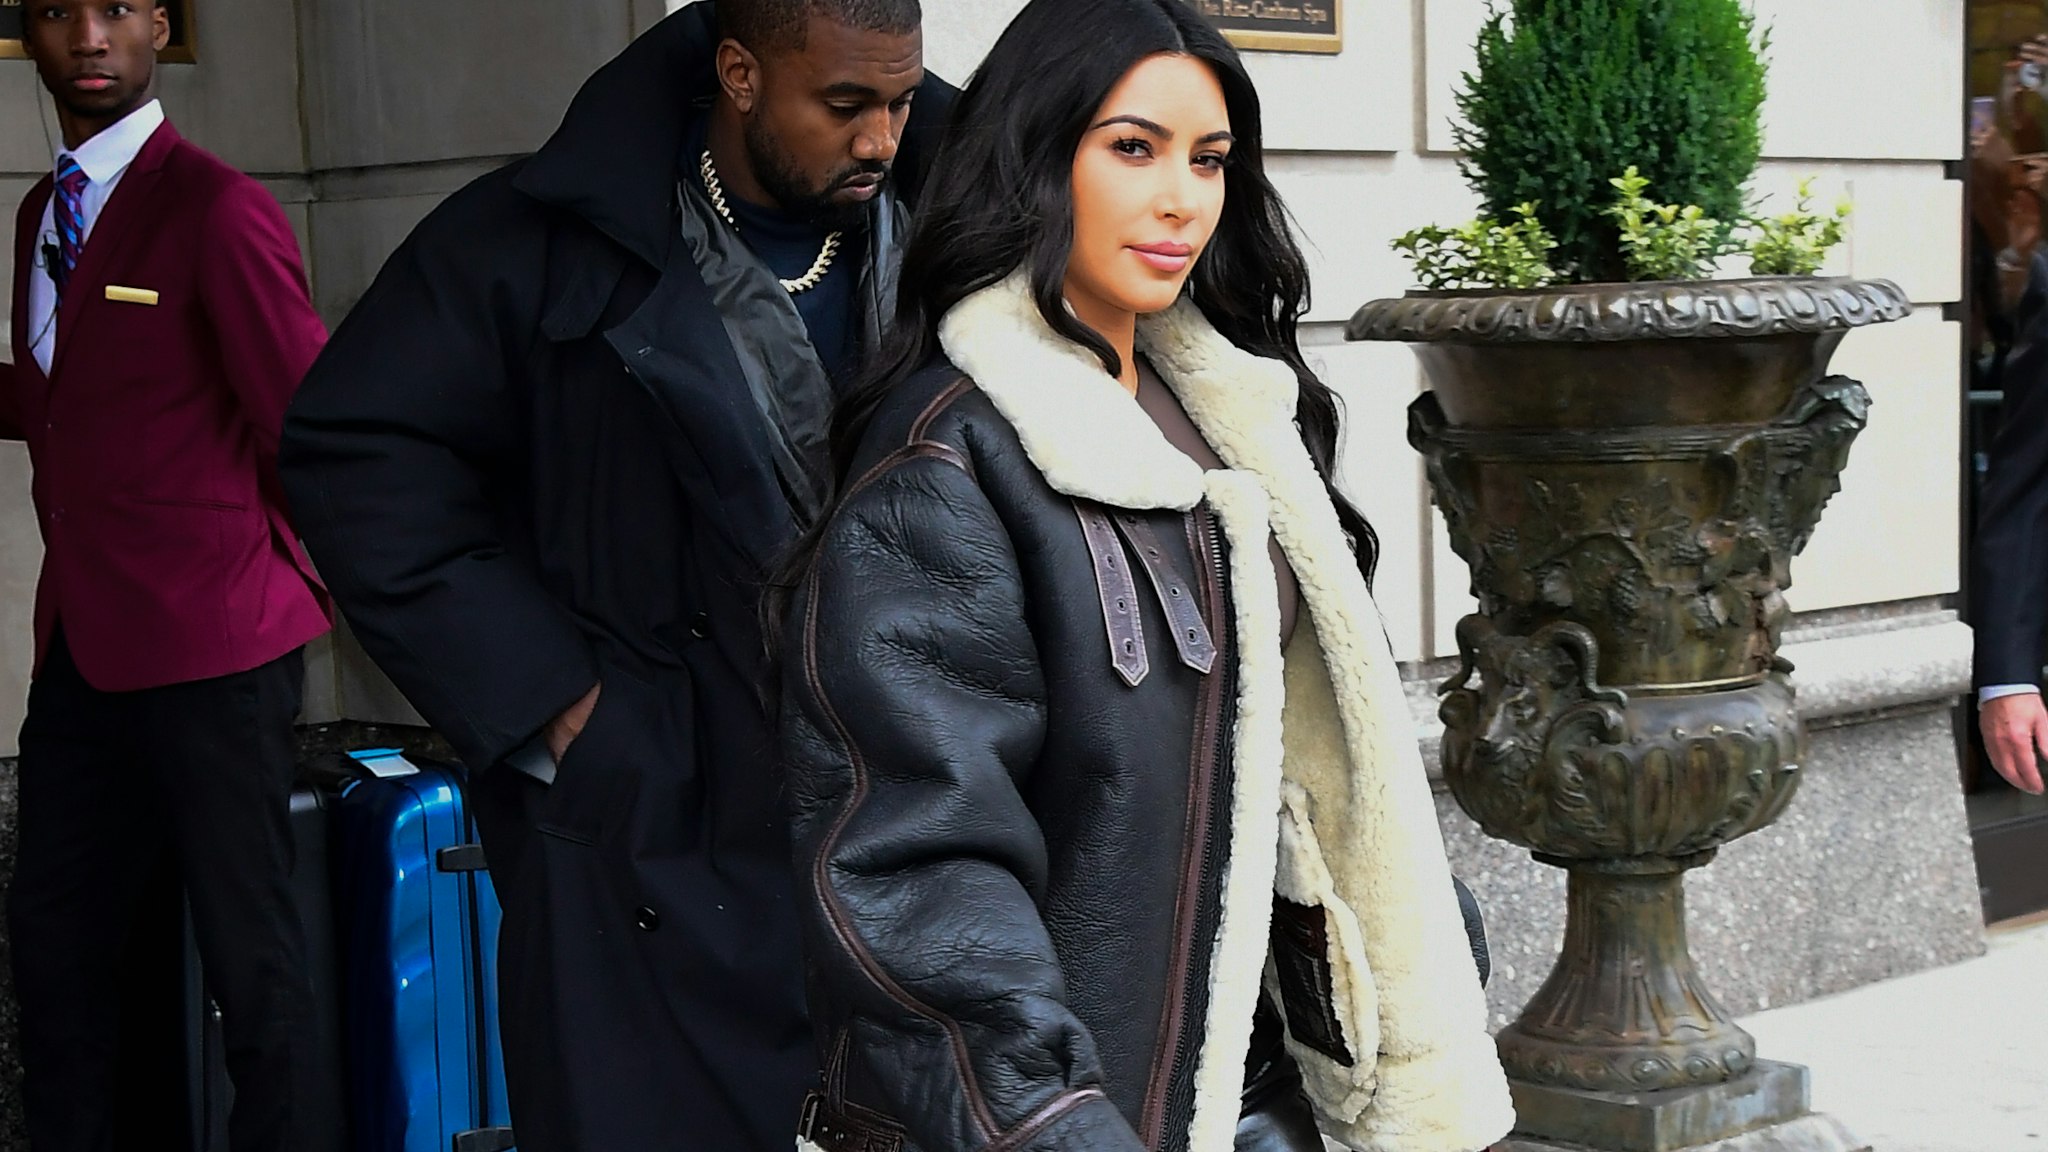 NEW YORK, NY - NOVEMBER 07: Kim Kardashian-West and Kanye West are seen out and about in Manhatta on November 7, 2019 in New York City. (Photo by Raymond Hall/GC Images) Comp Save to Board PREMIUM ACCESS Small